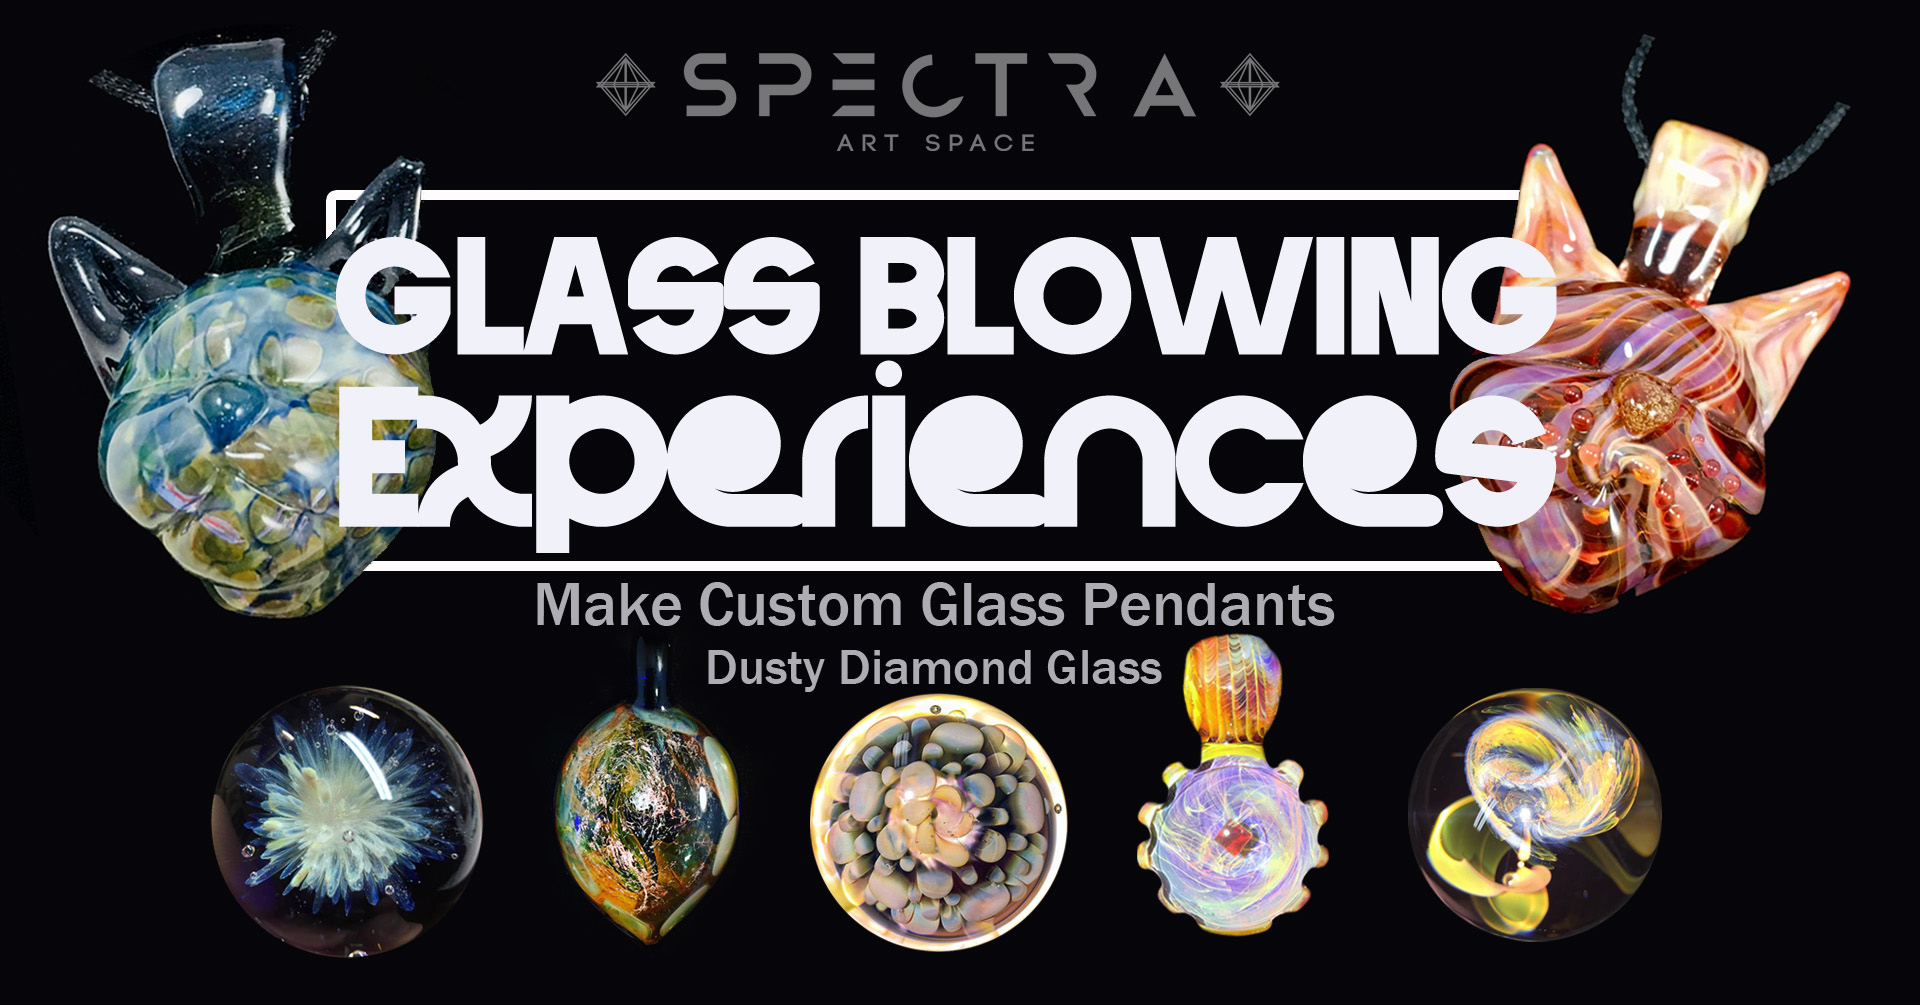 Making Custom Glass Pendants | Glass Blowing Experiences with Dusty Diamond